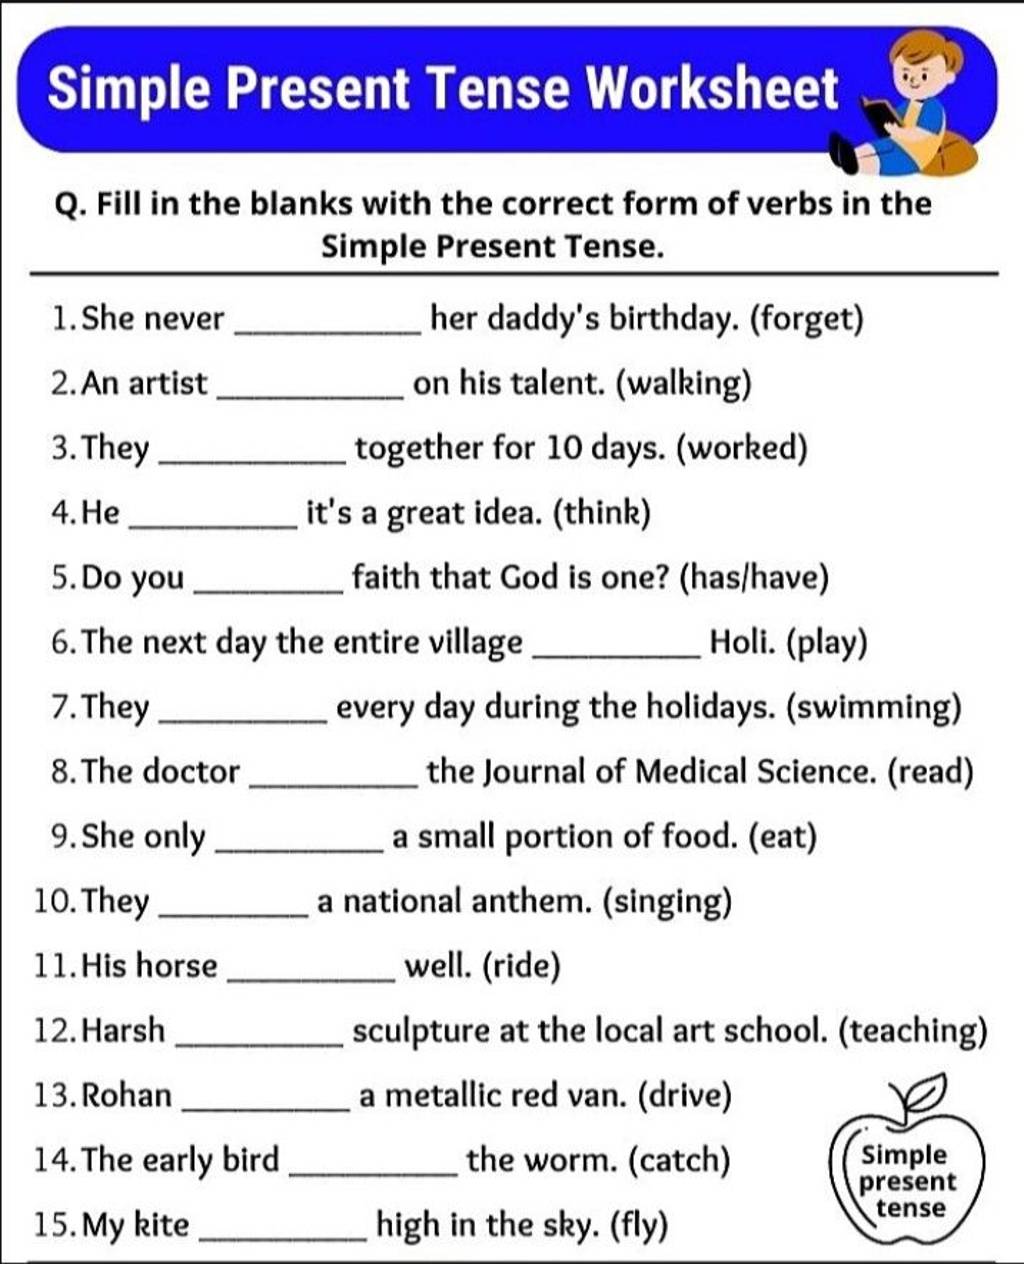 simple-present-tense-worksheet-q-fill-in-the-blanks-with-the-correct-for